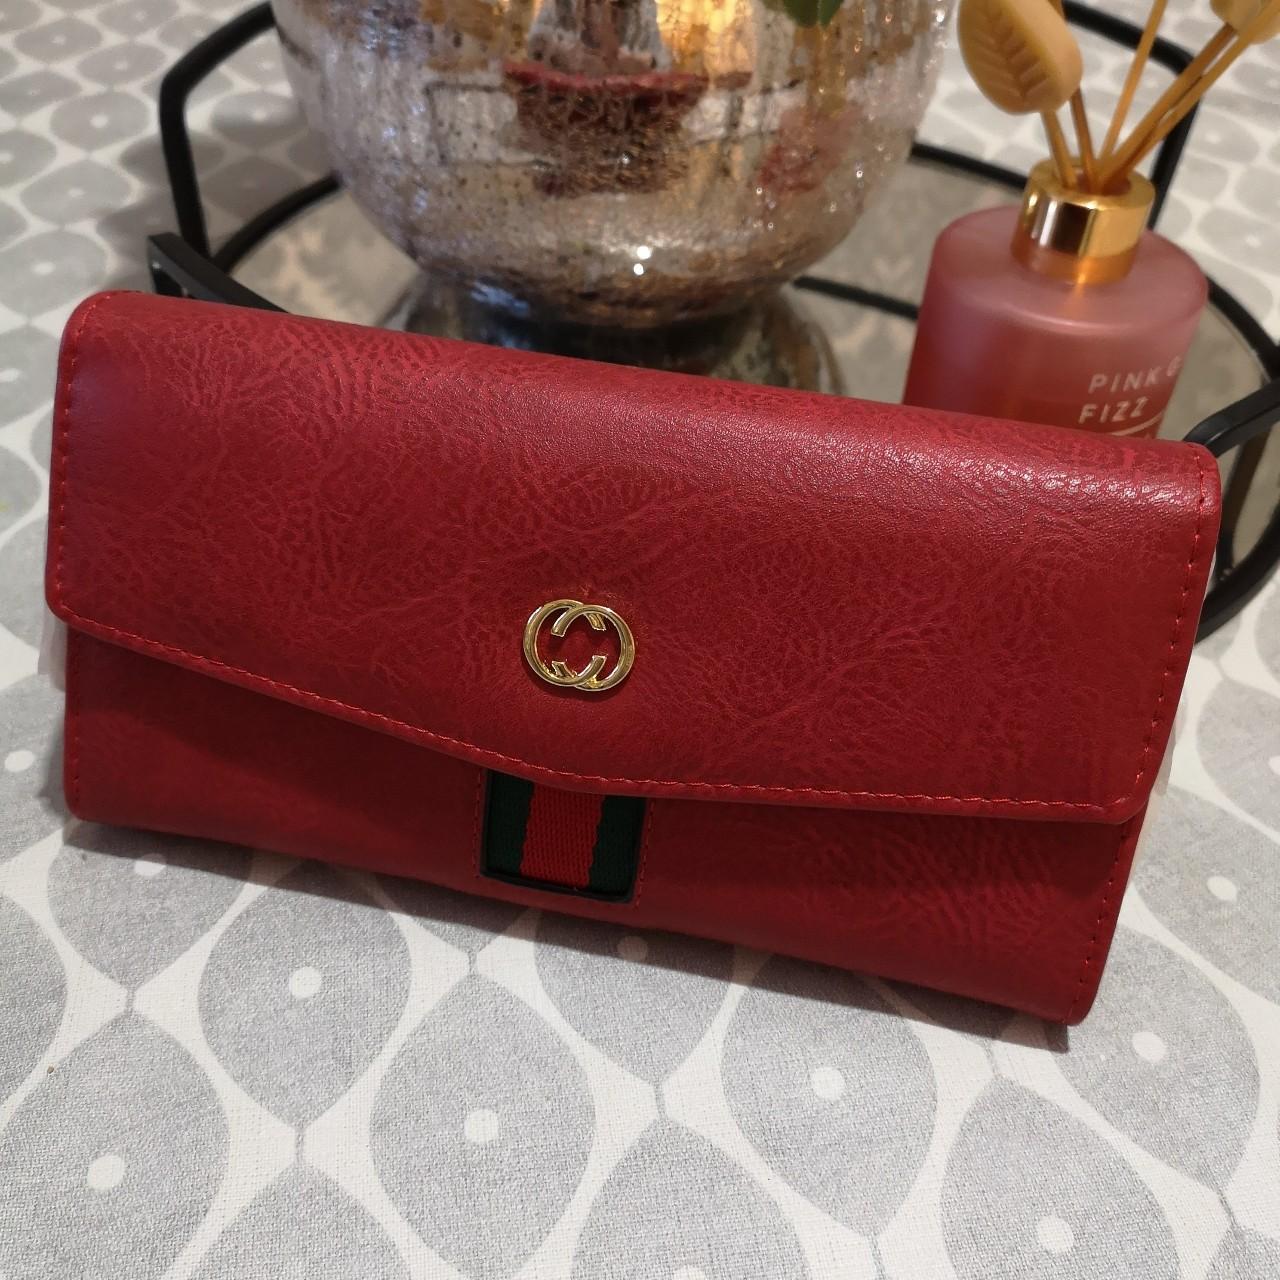 Women's Red and Green Bag